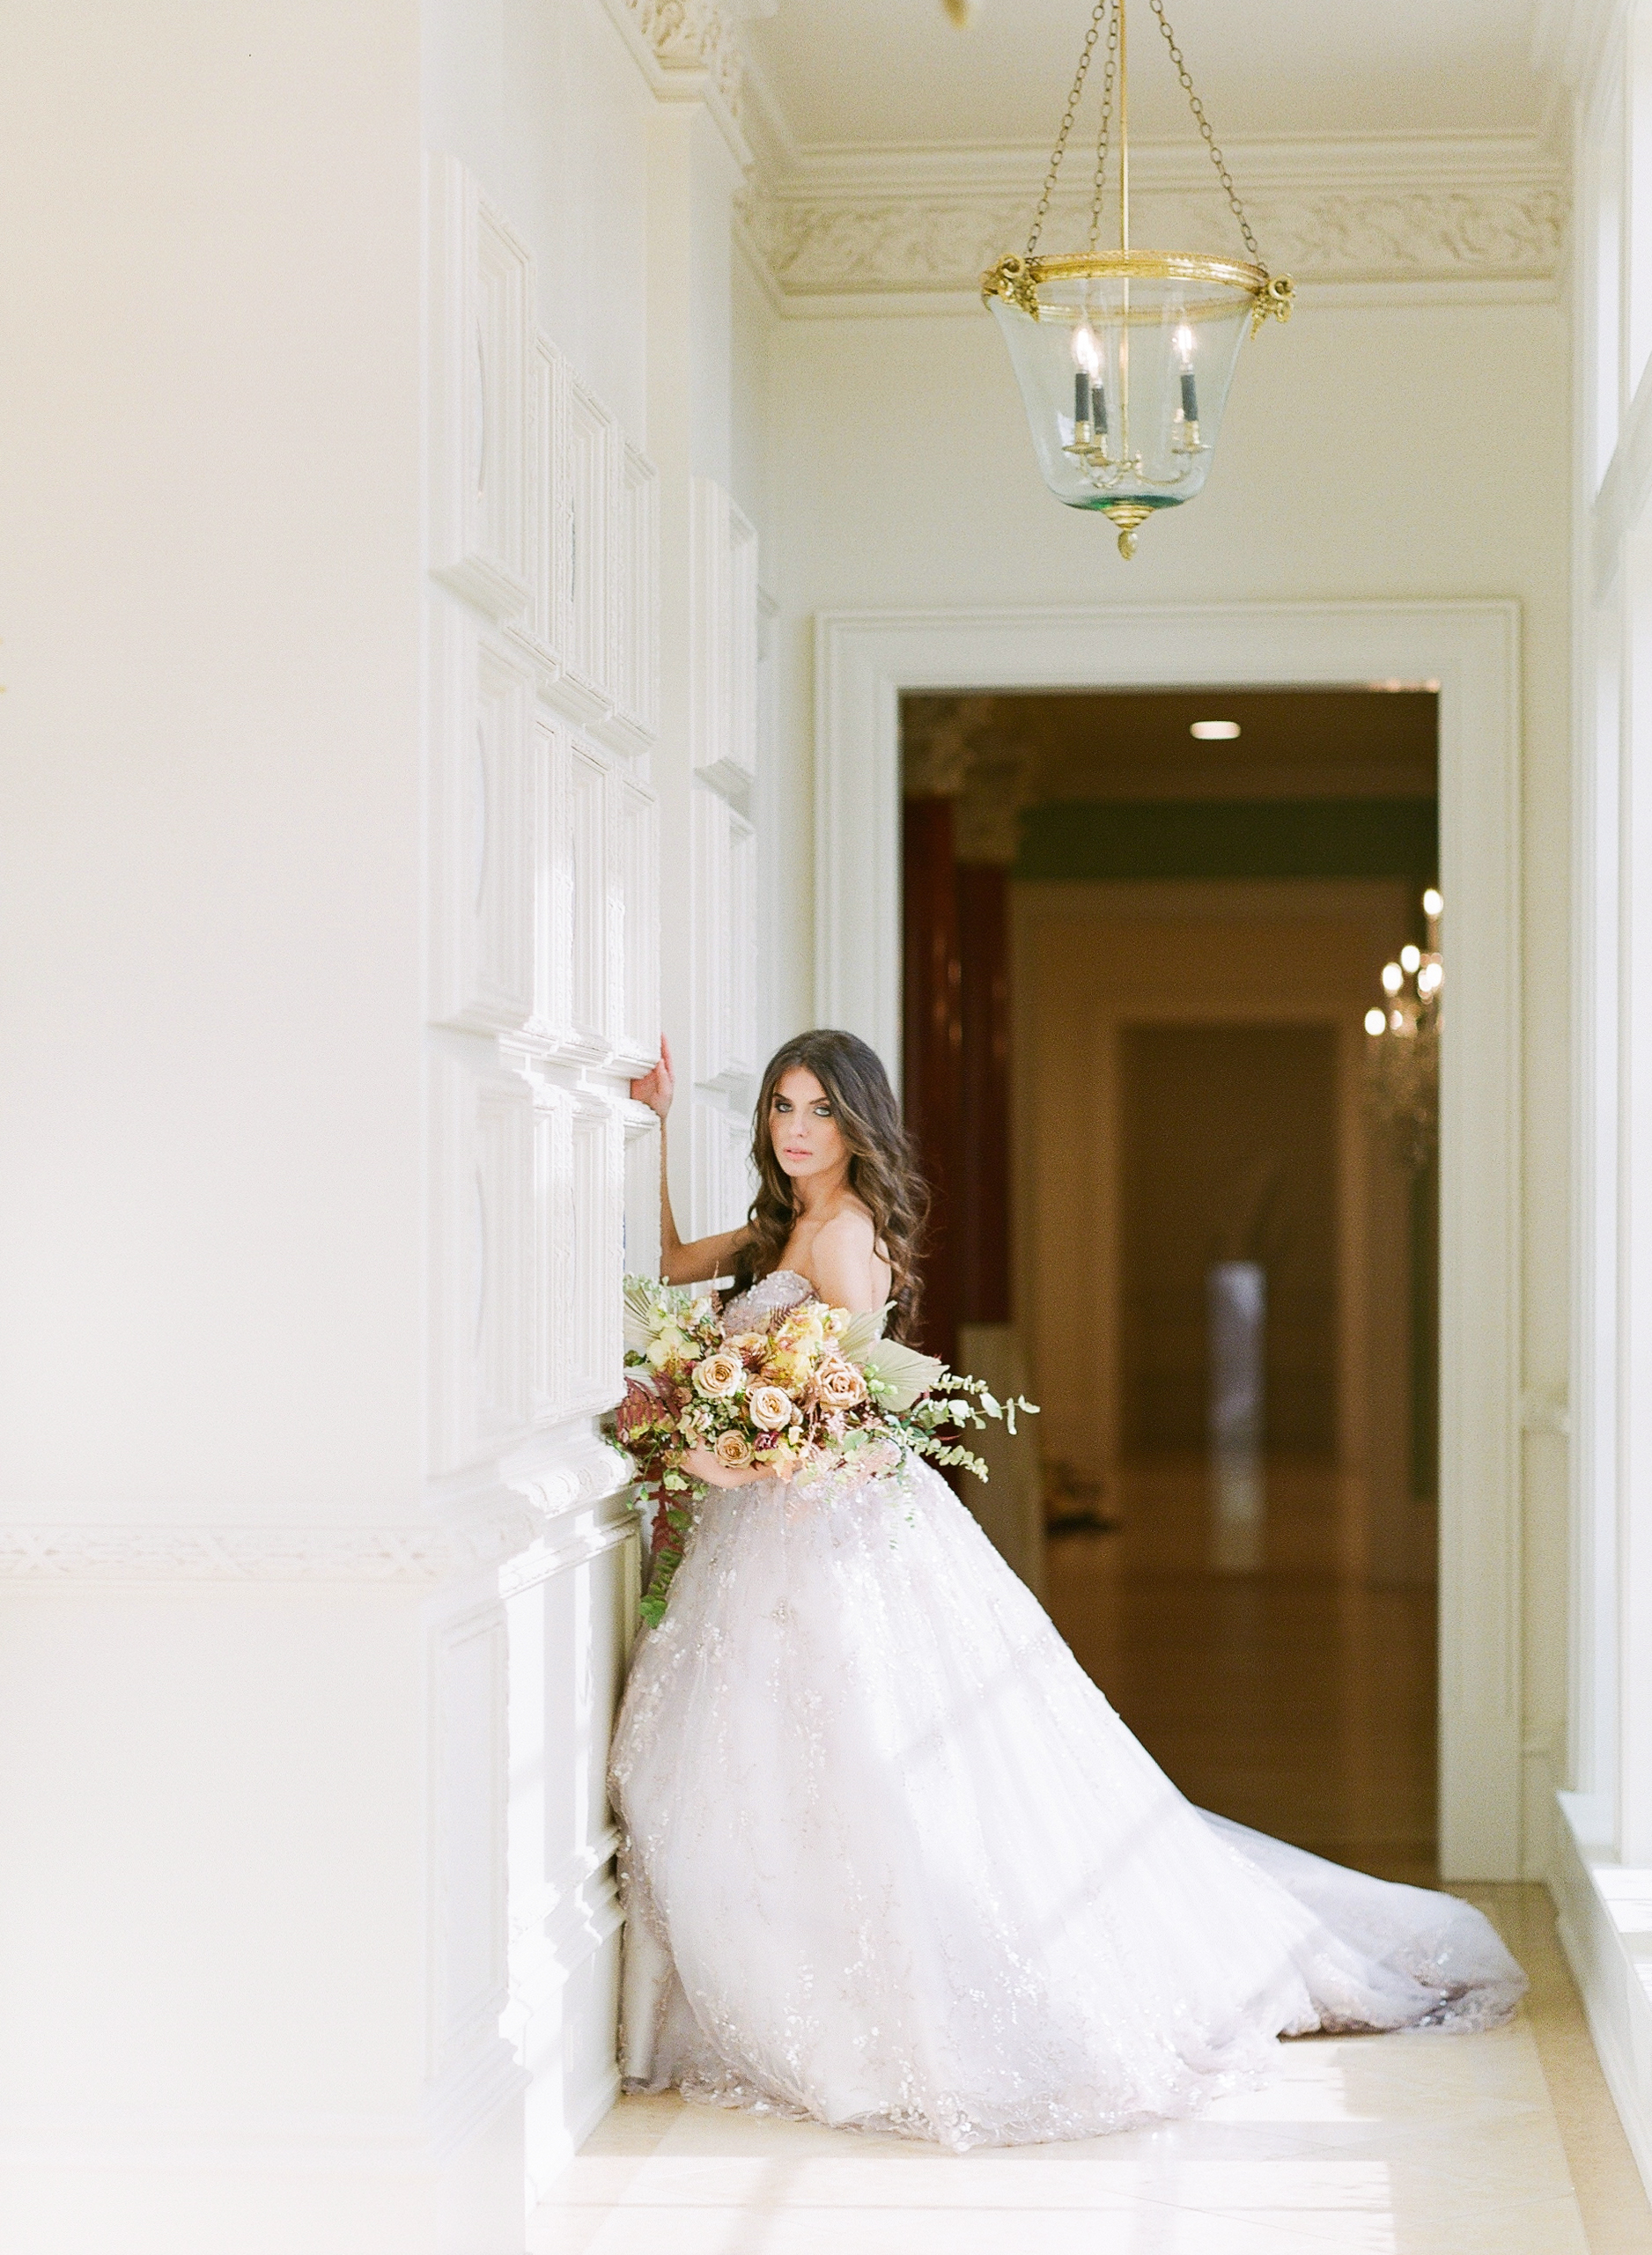 Bride in Hallway leaning against Wall Holding Bouquet Photo